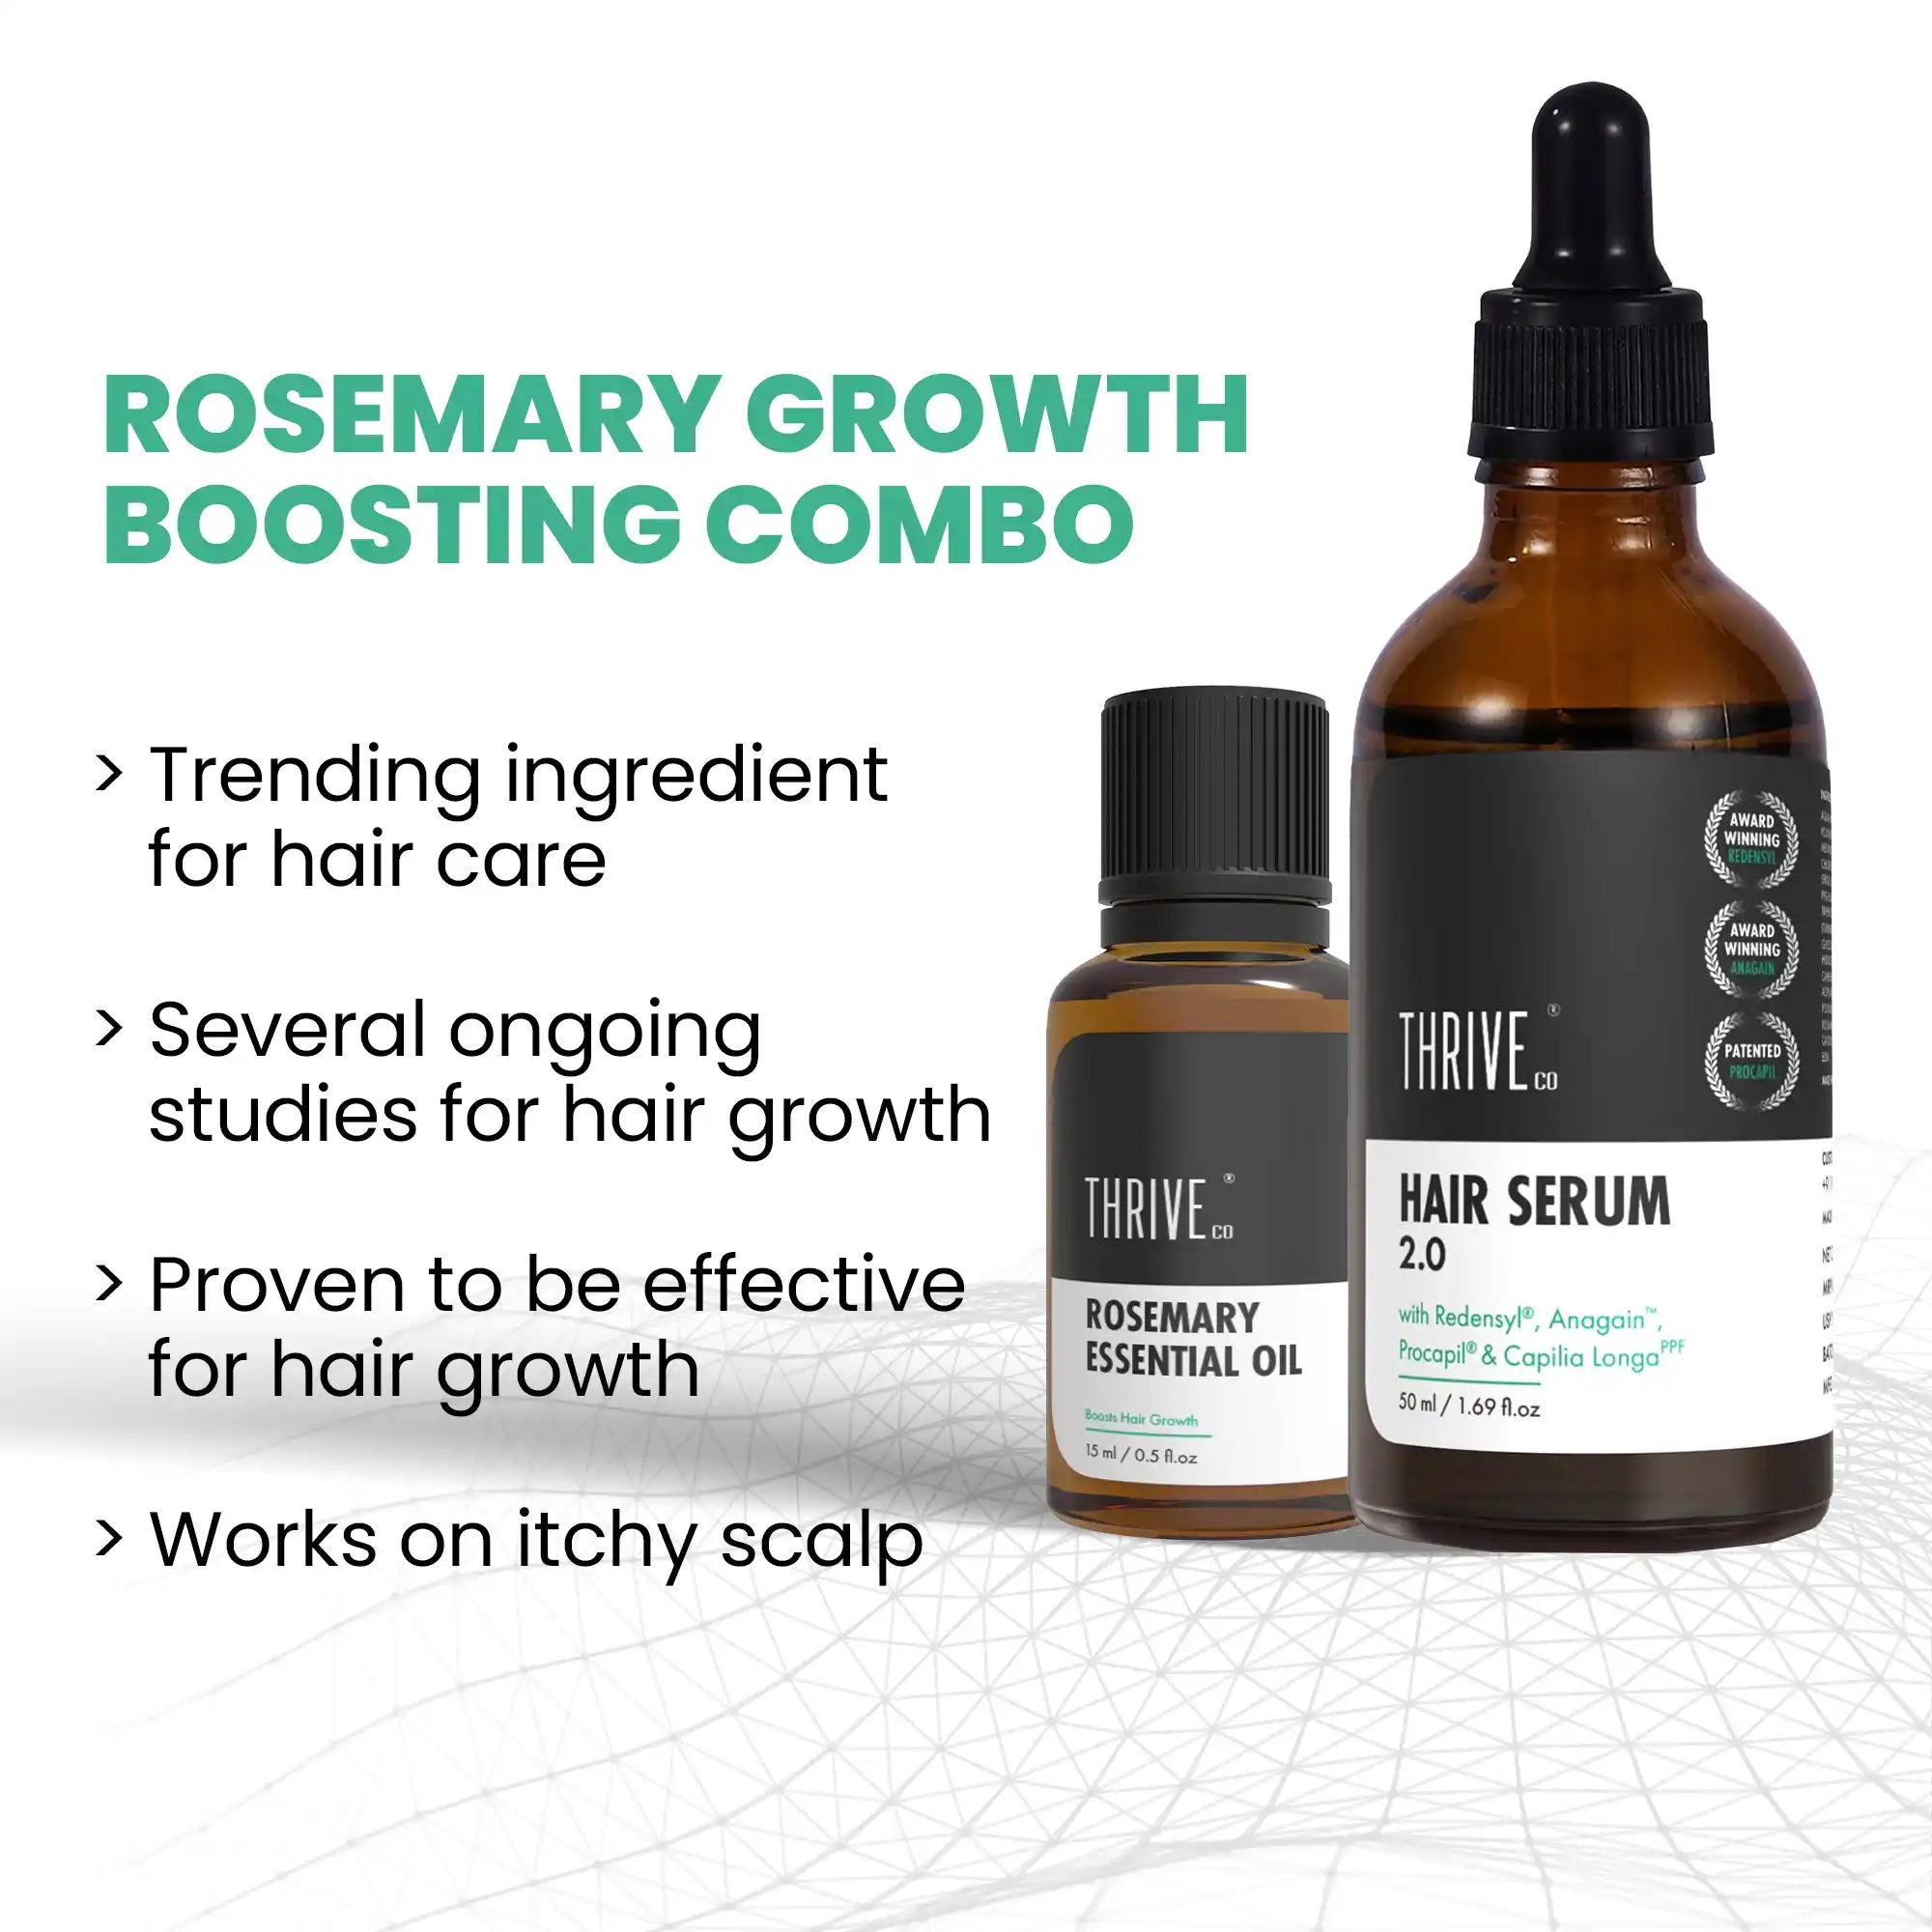 thriveco rosemary hair growth boosting combo of oil and serum